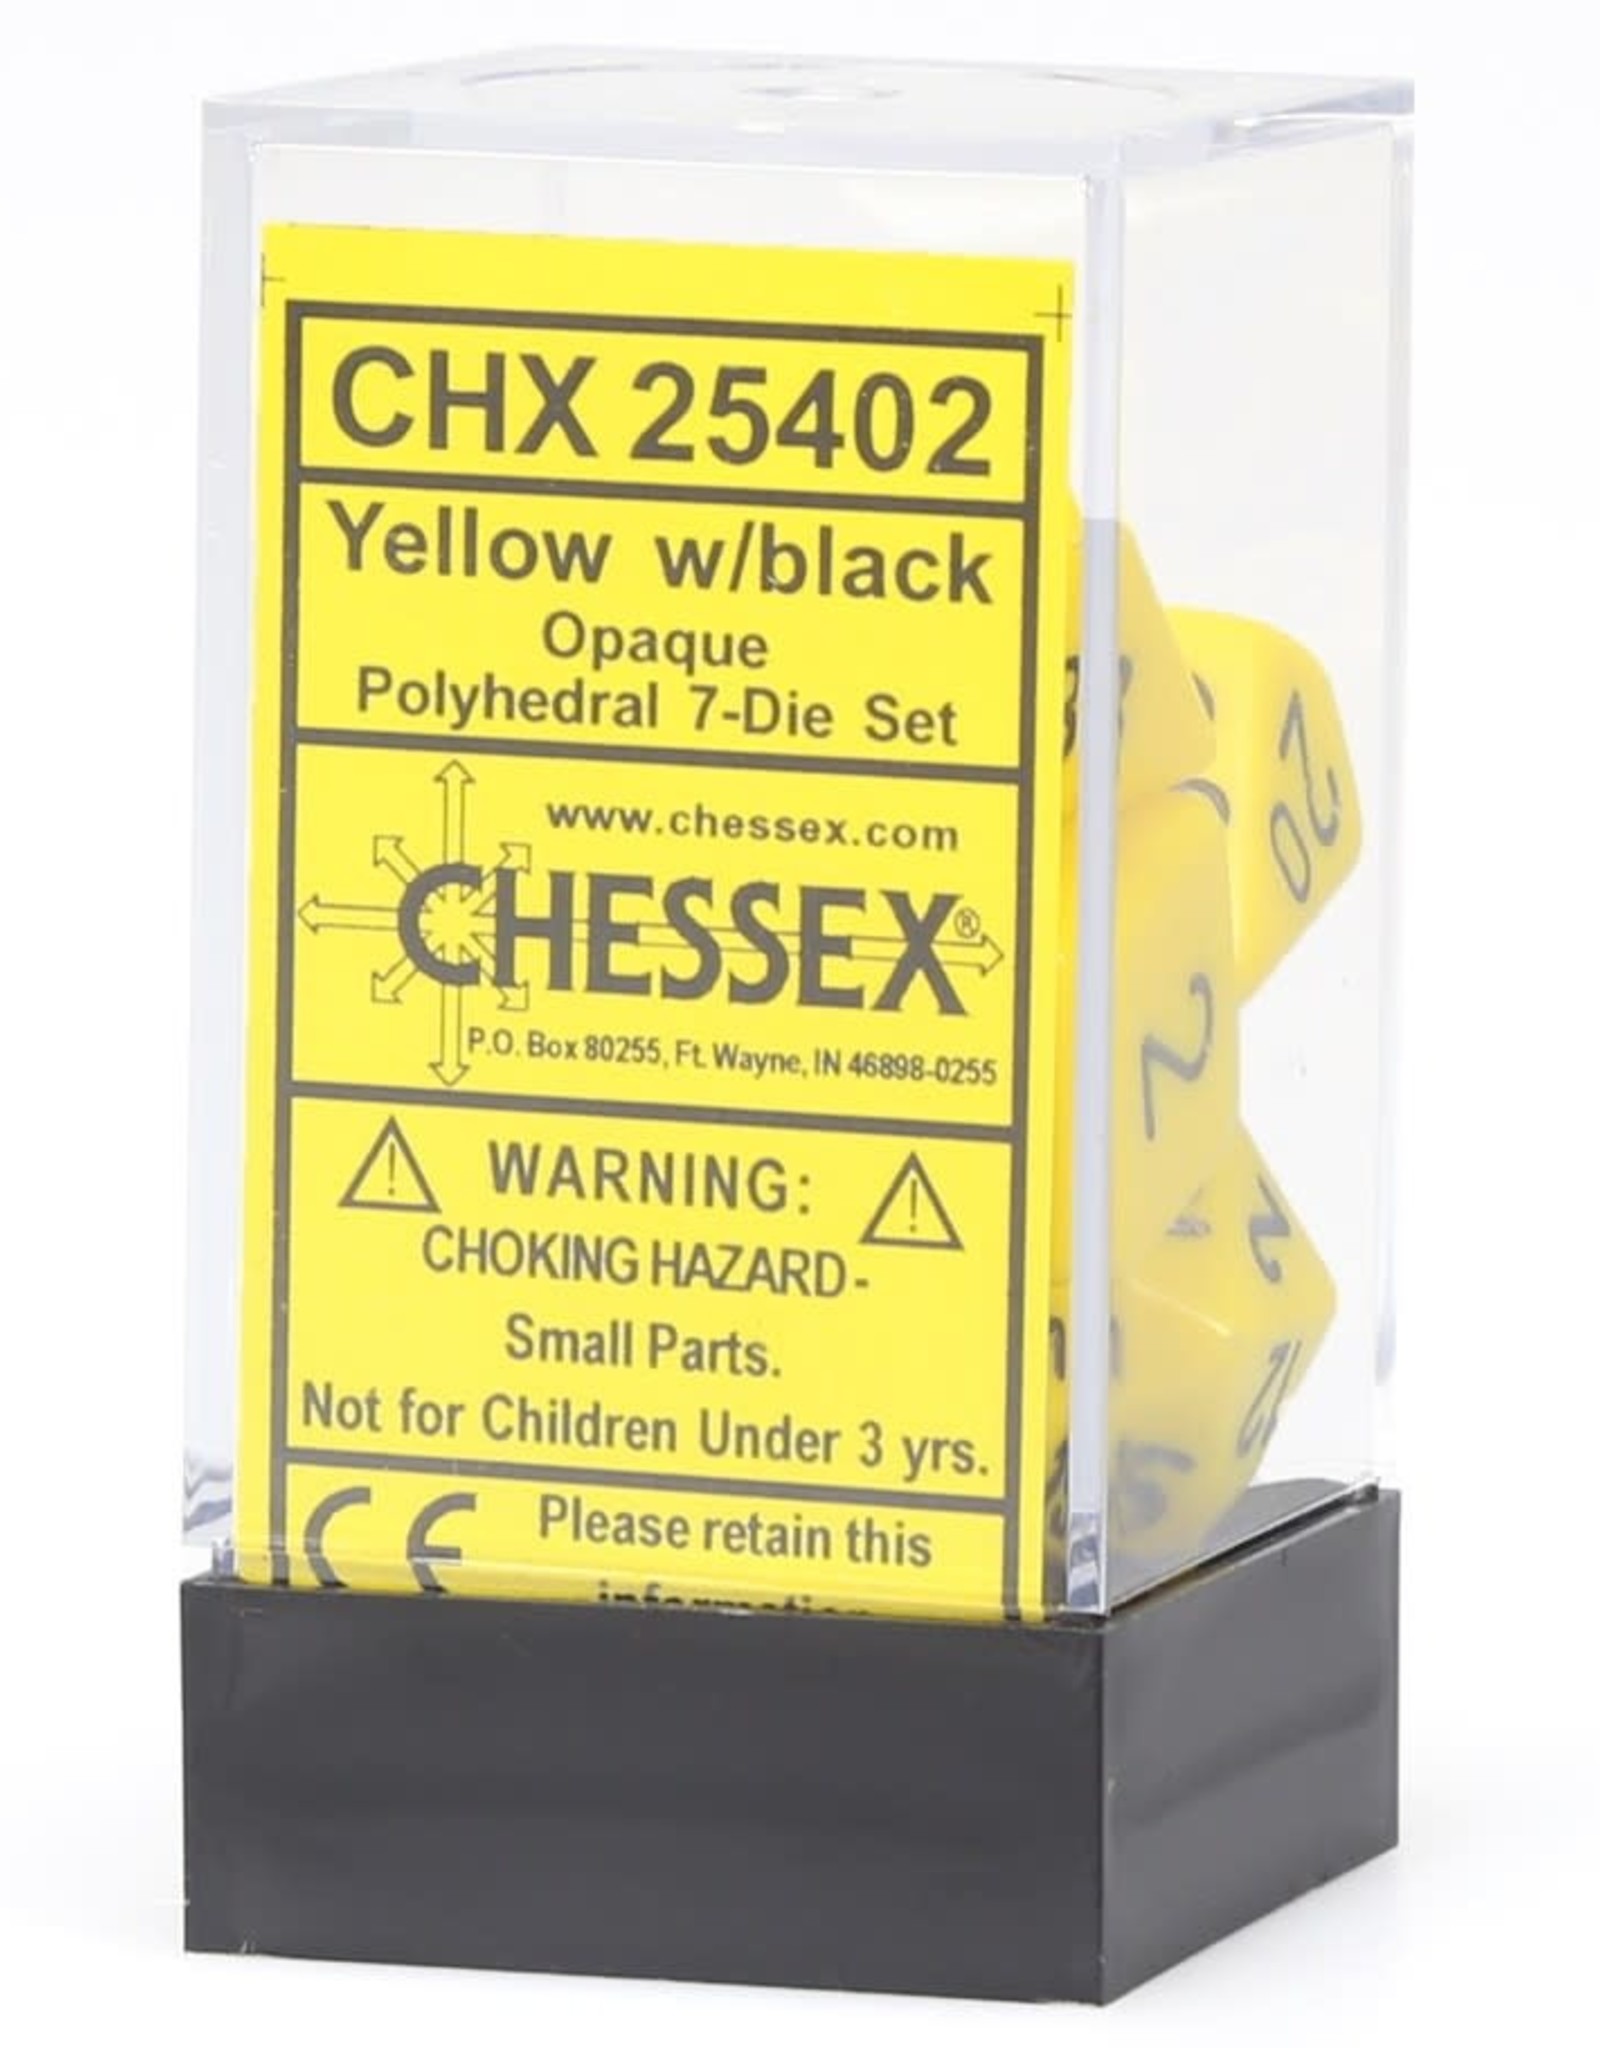 Chessex CHX Opaque Dice: Yellow/Black Poly 7-Die Set 25402